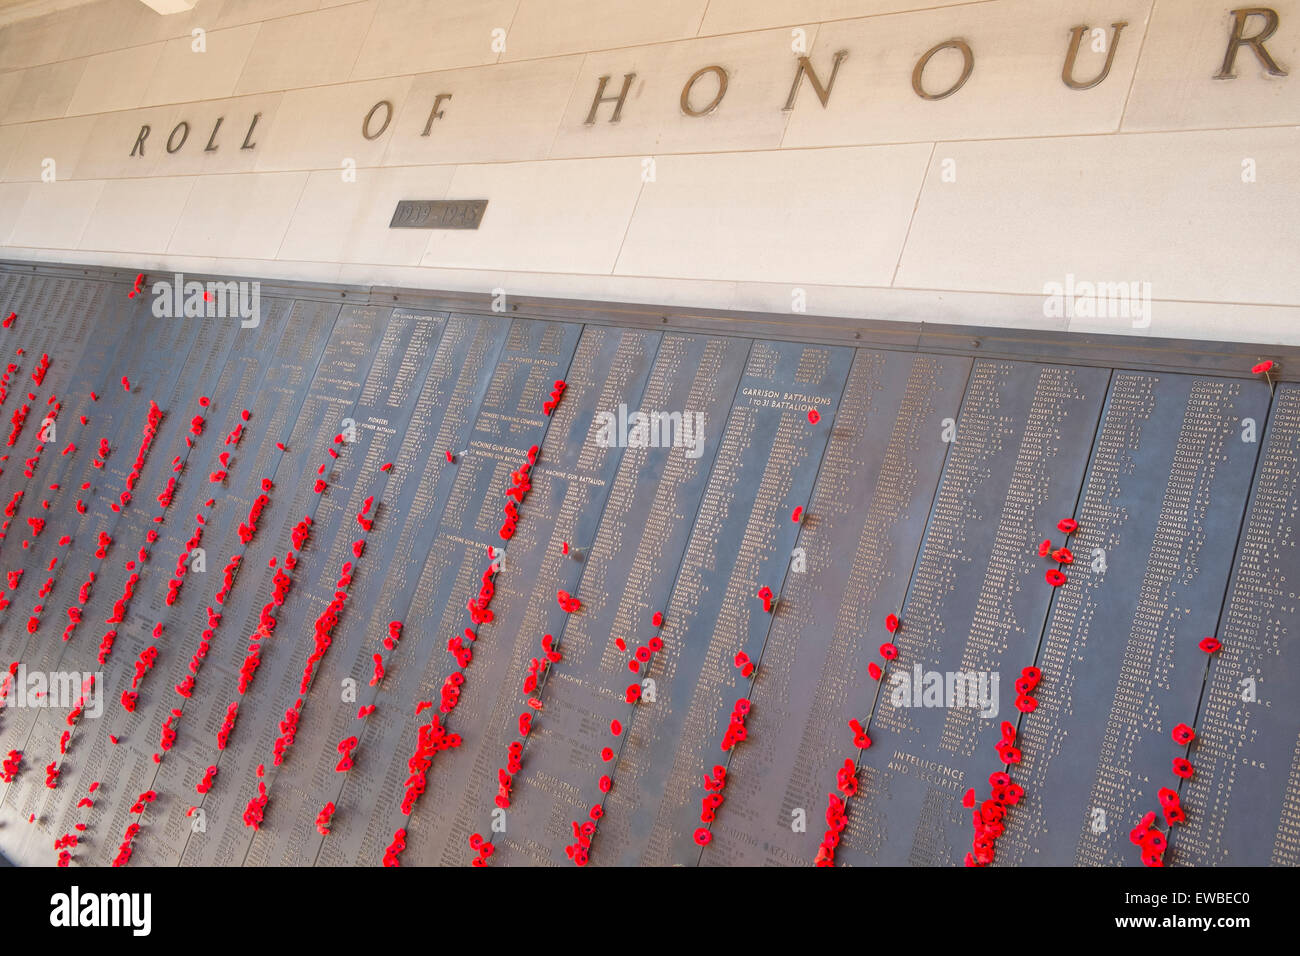 Roll of Honour with Poppies and names of soldiers who perished in various wars at the Australian War Memorial in Canberra,ACT Stock Photo